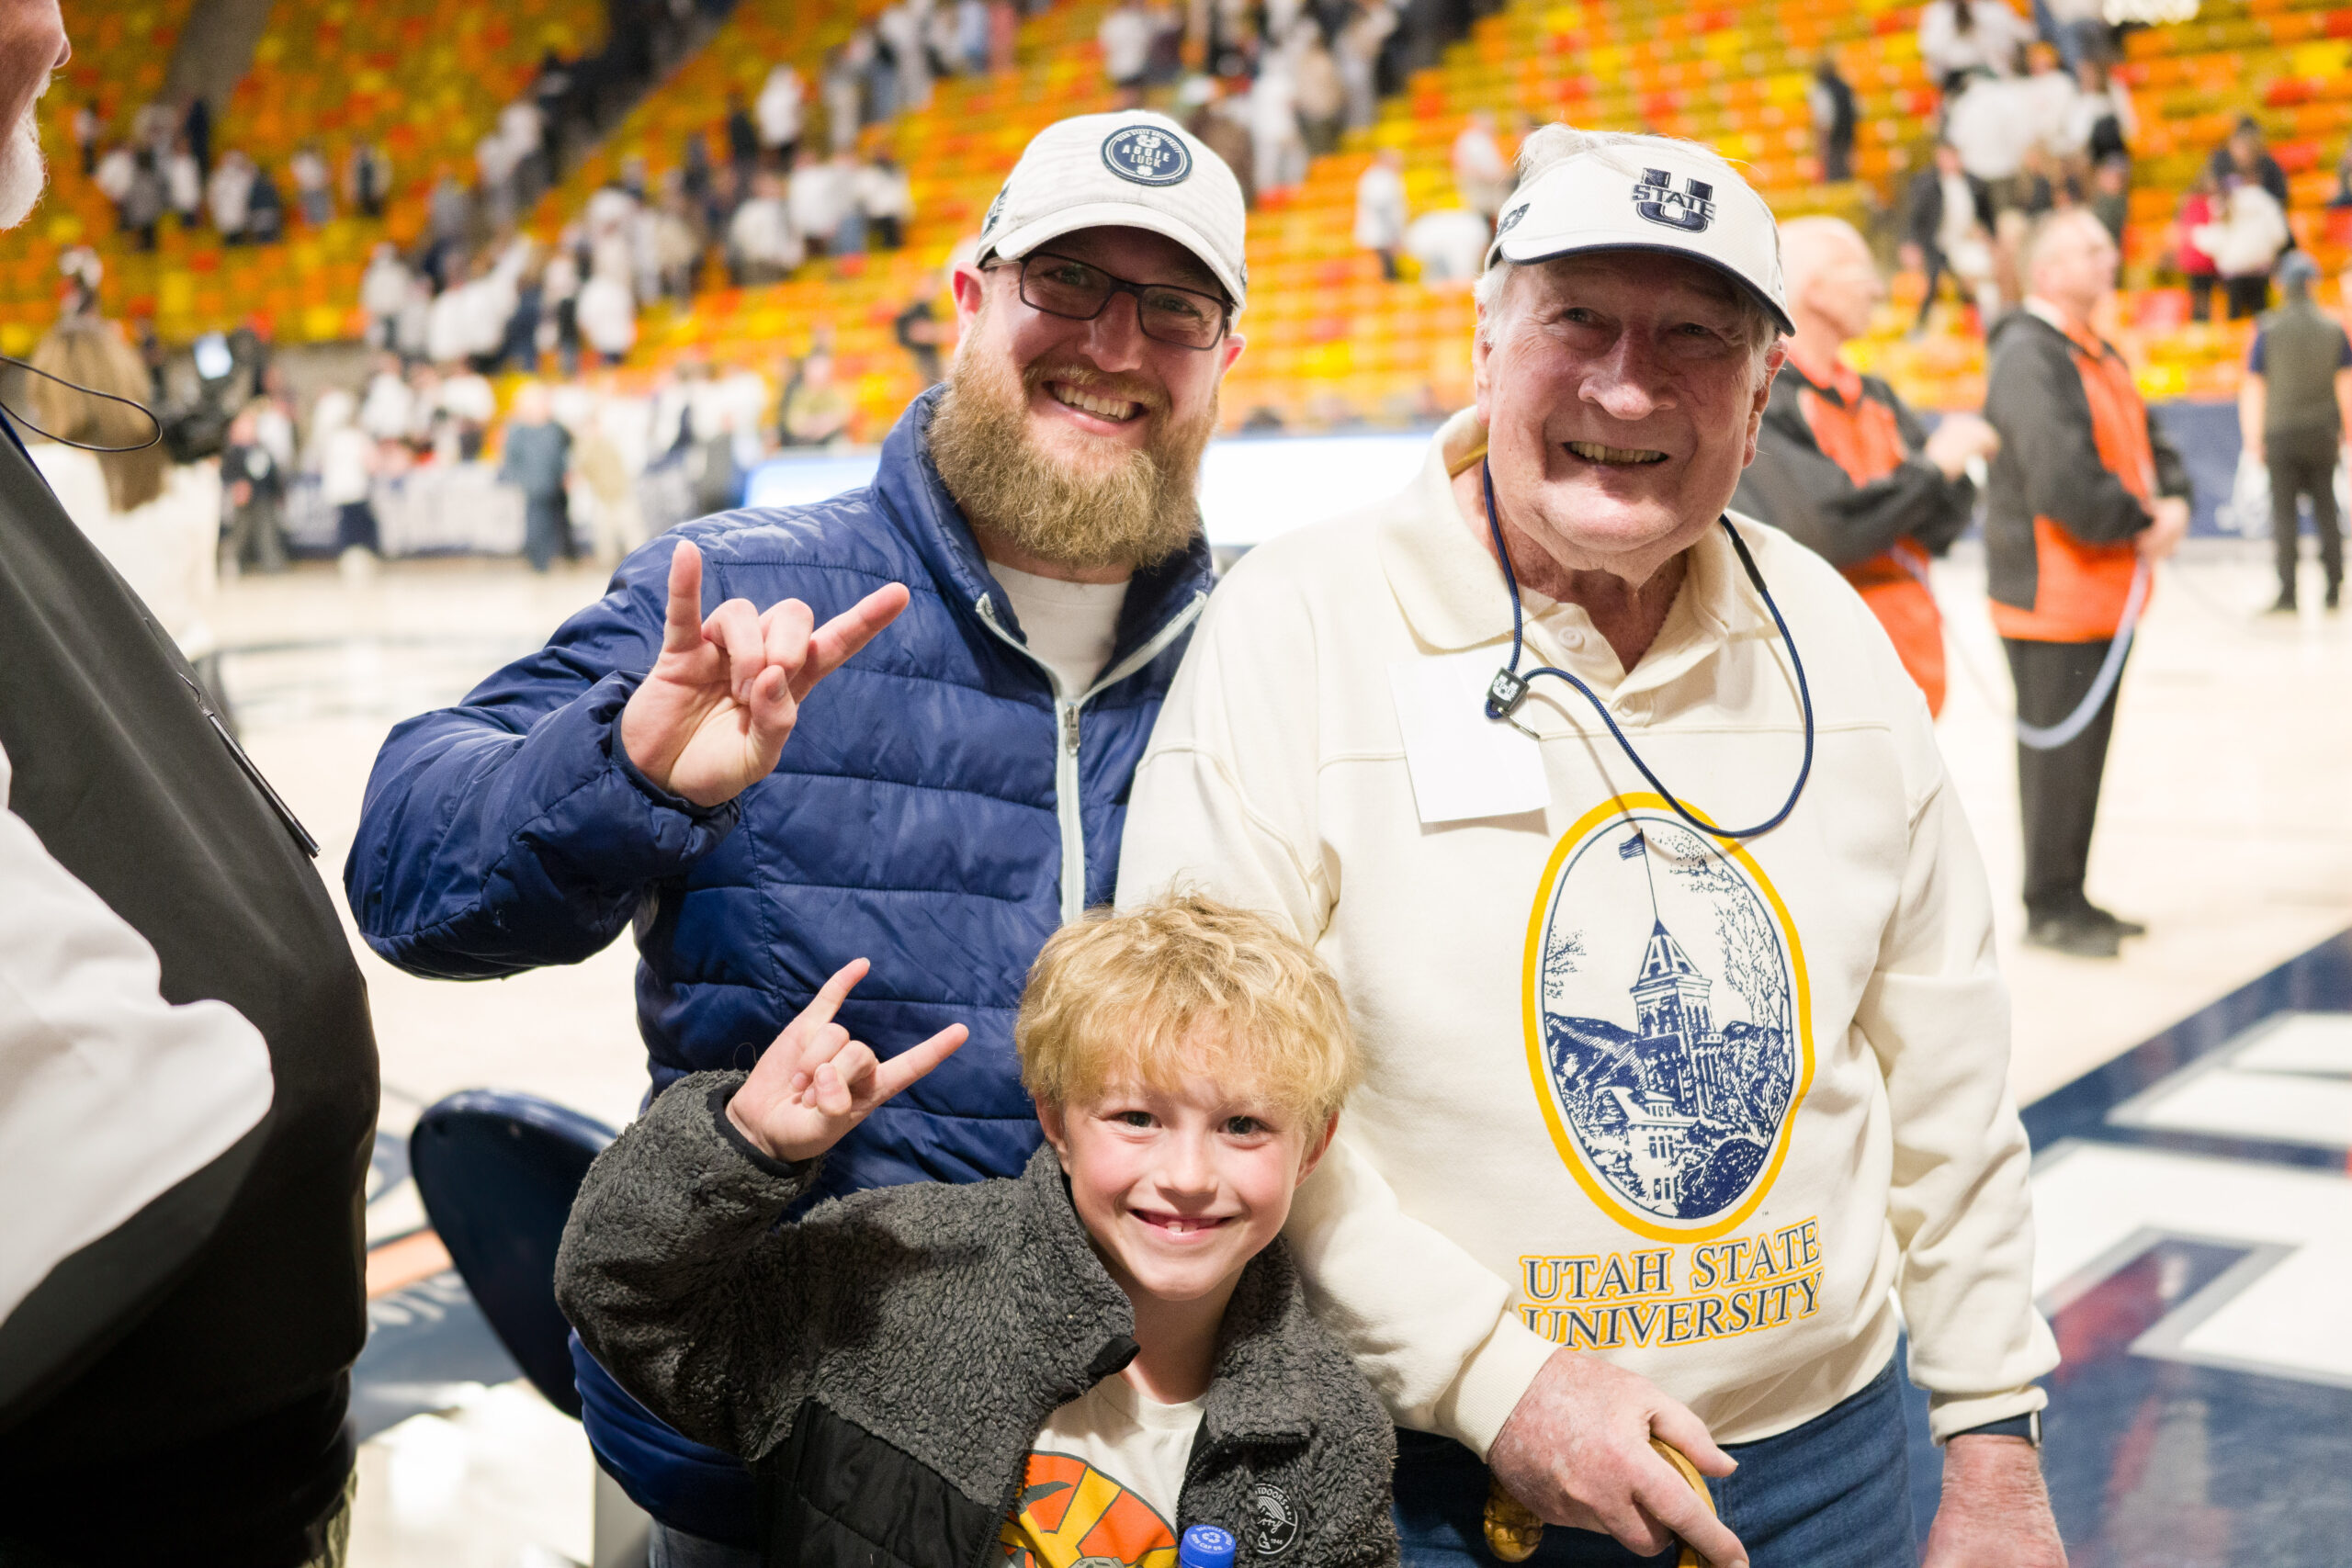 Magazine editor Tim Olsen poses with his grandfather and son after a Utah State men's basketball game.